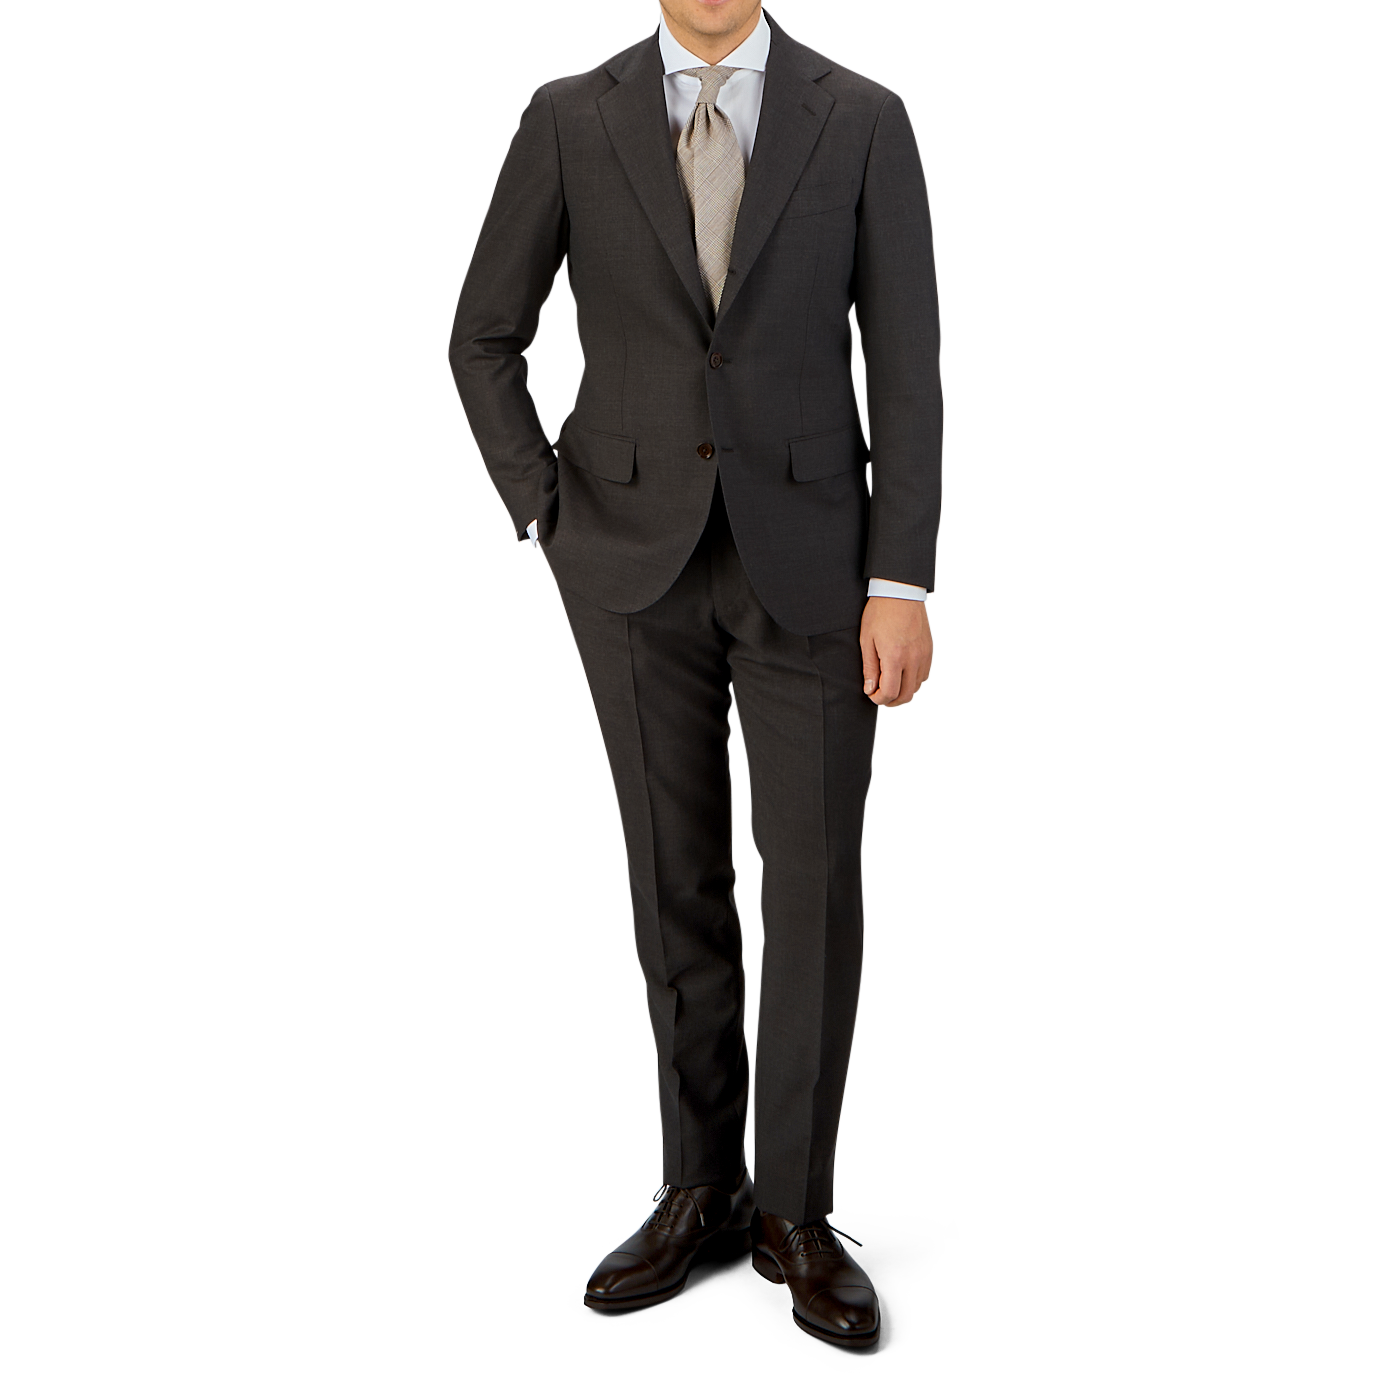 Man in a Ring Jacket tailored Dark Brown High Twist Wool Suit made of wool fresco fabric, with a white shirt and patterned tie, standing with one hand in his pocket, wearing dark brown dress shoes.